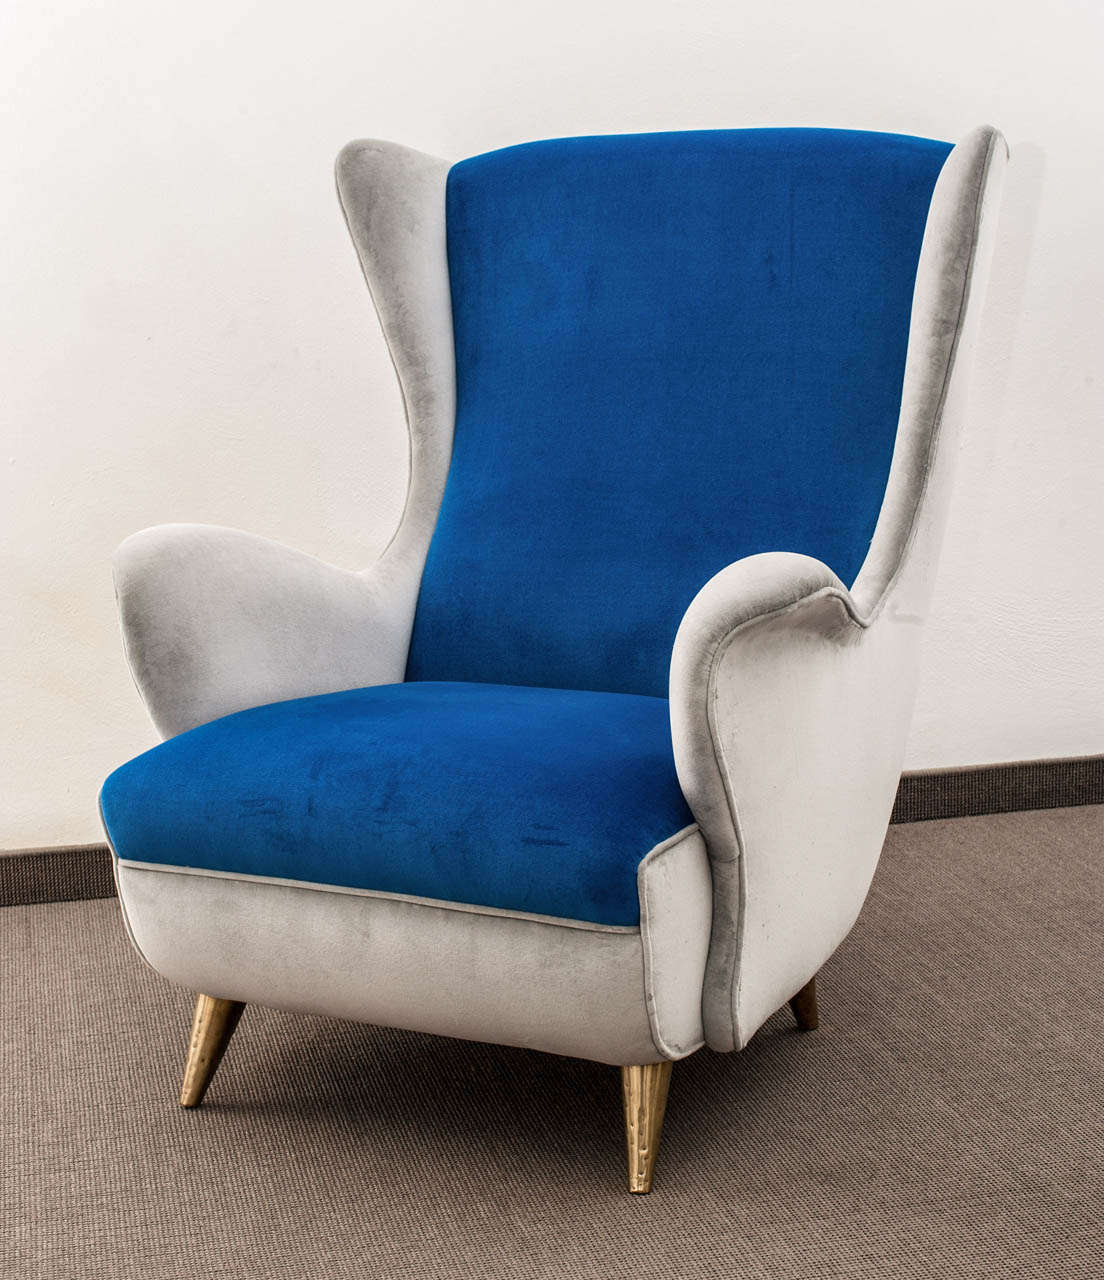 Pair of armchairs, blue and grey velvet upholstery.
Brass sabots.
Italian manufactured, 1950's.